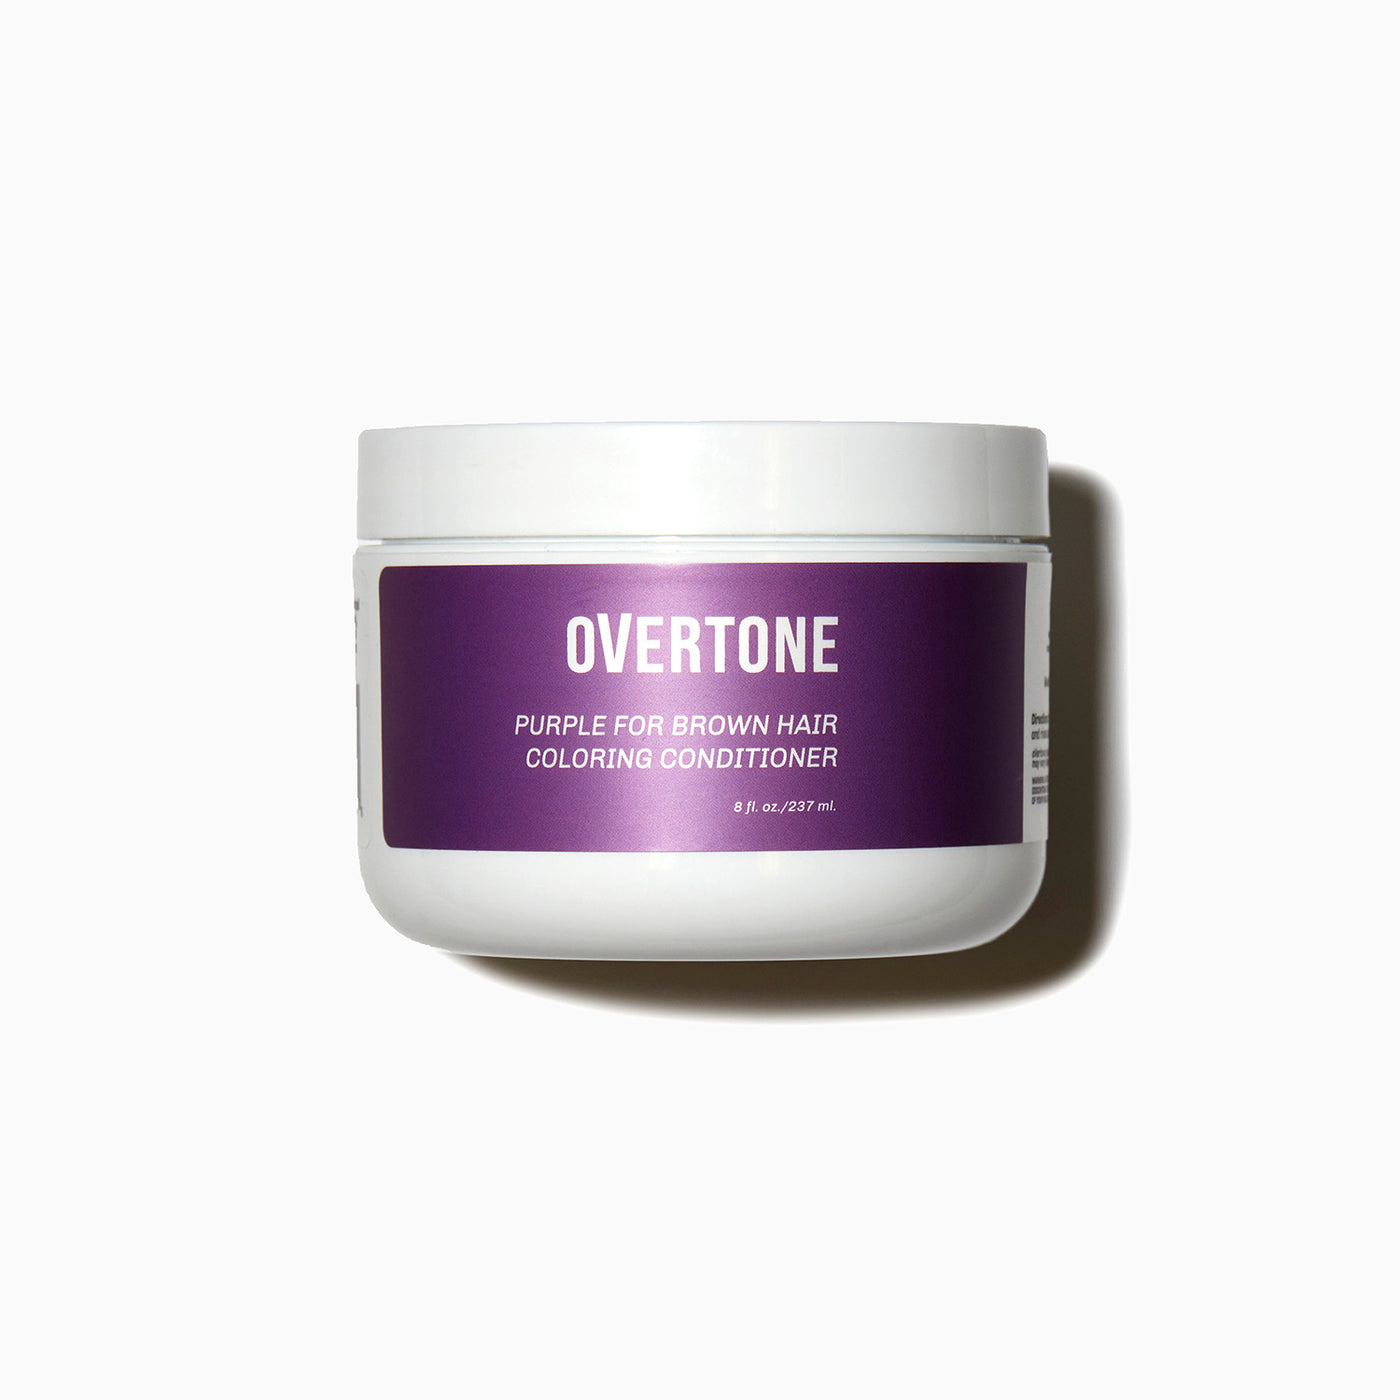 oVertone Purple for Brown Hair Coloring Conditioner